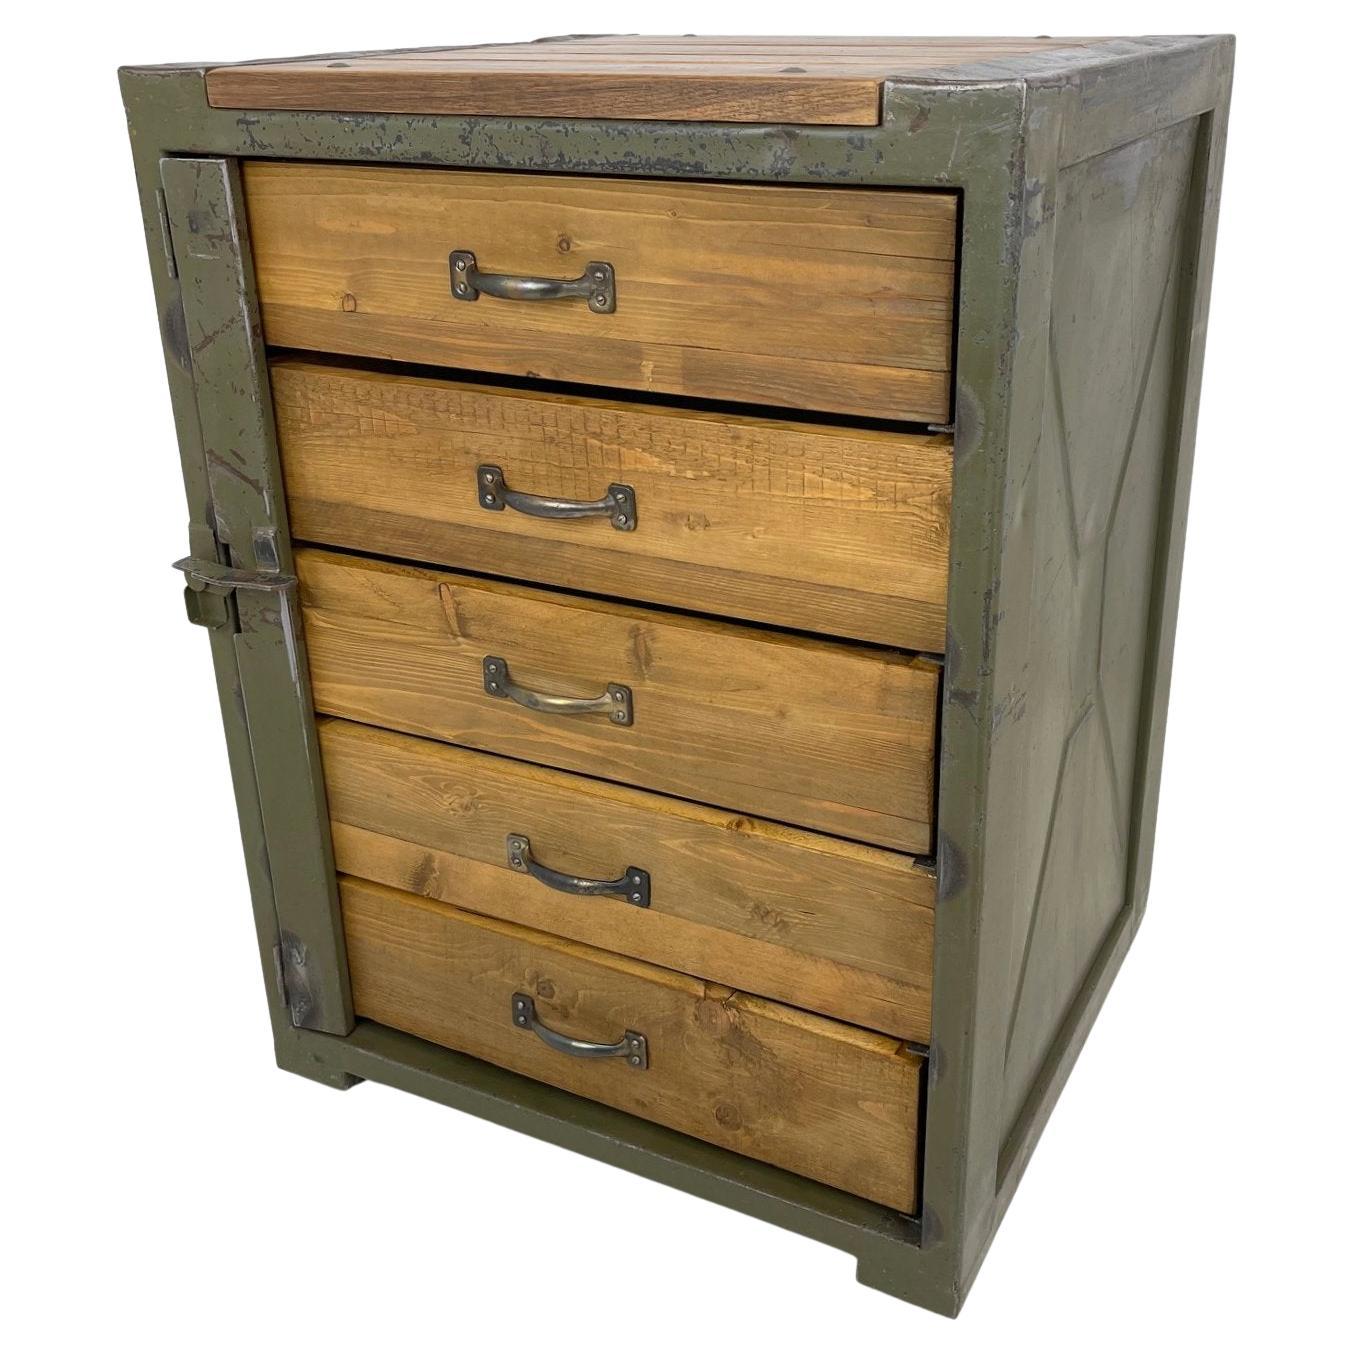 Iron and Wood Industrial Chest of Drawers